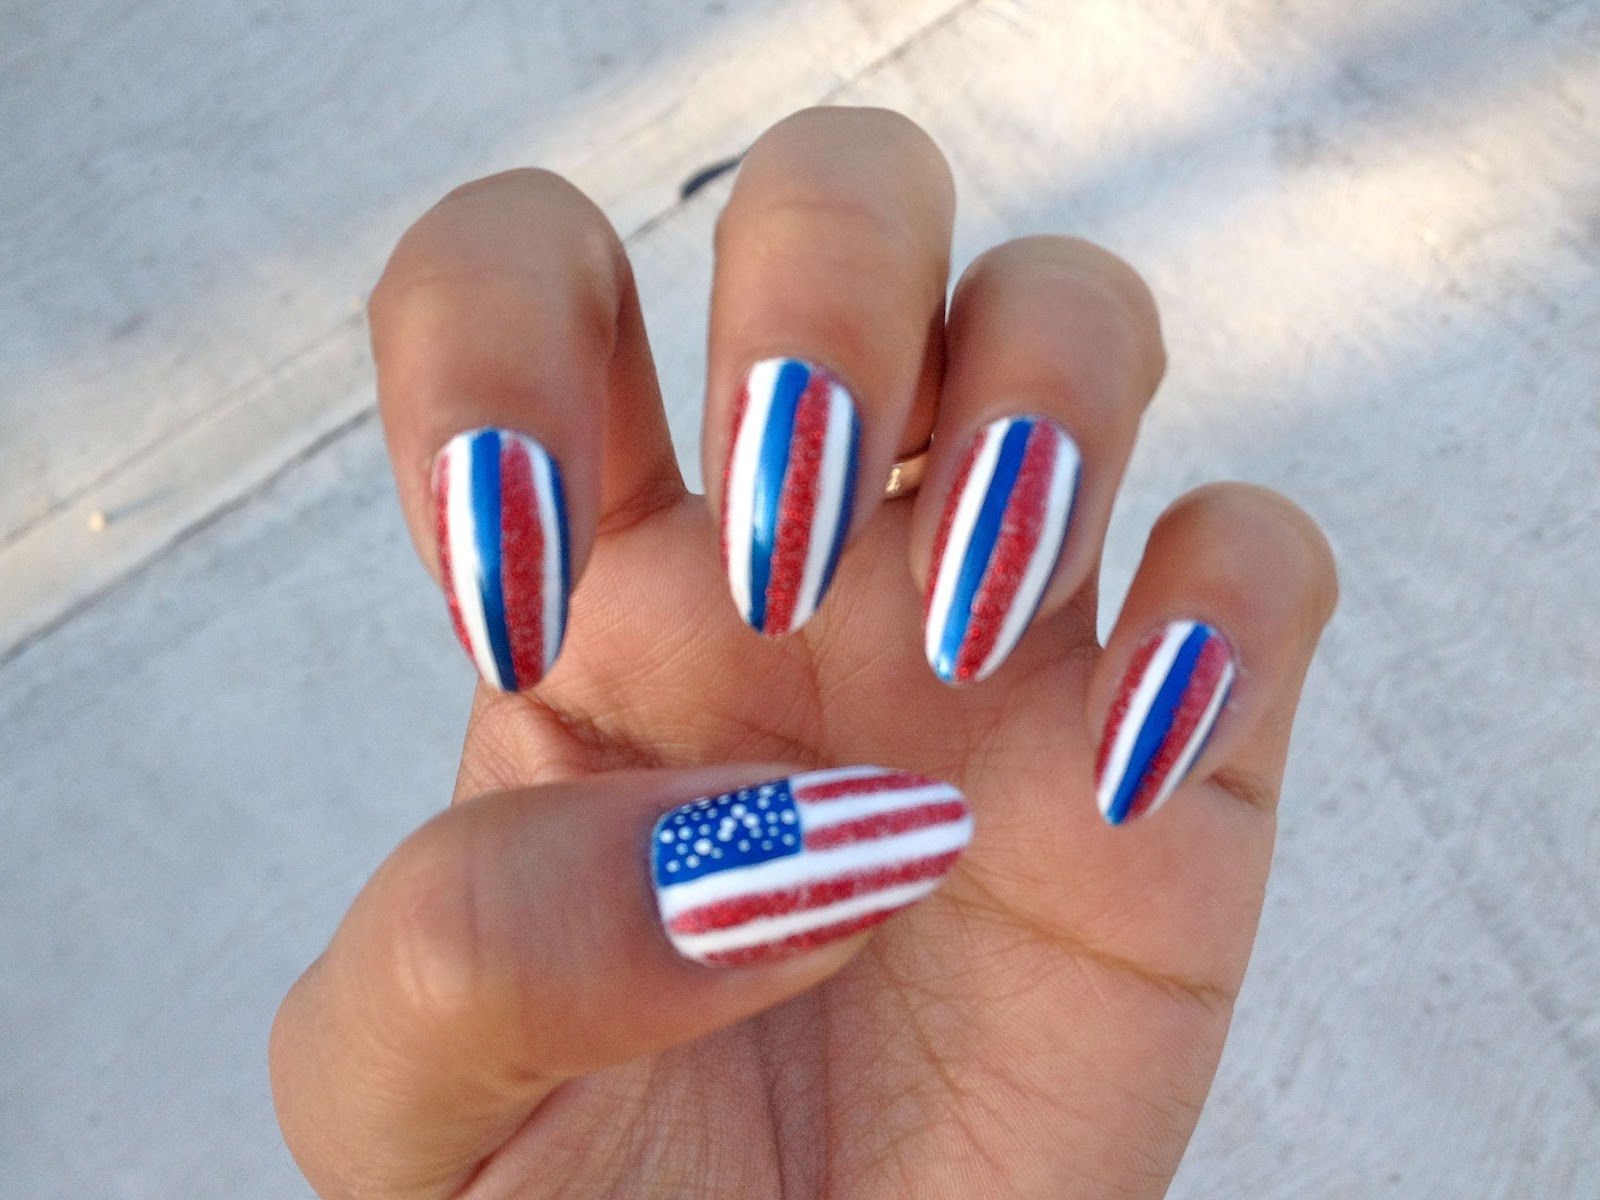 3. American Flag Nails - wide 5